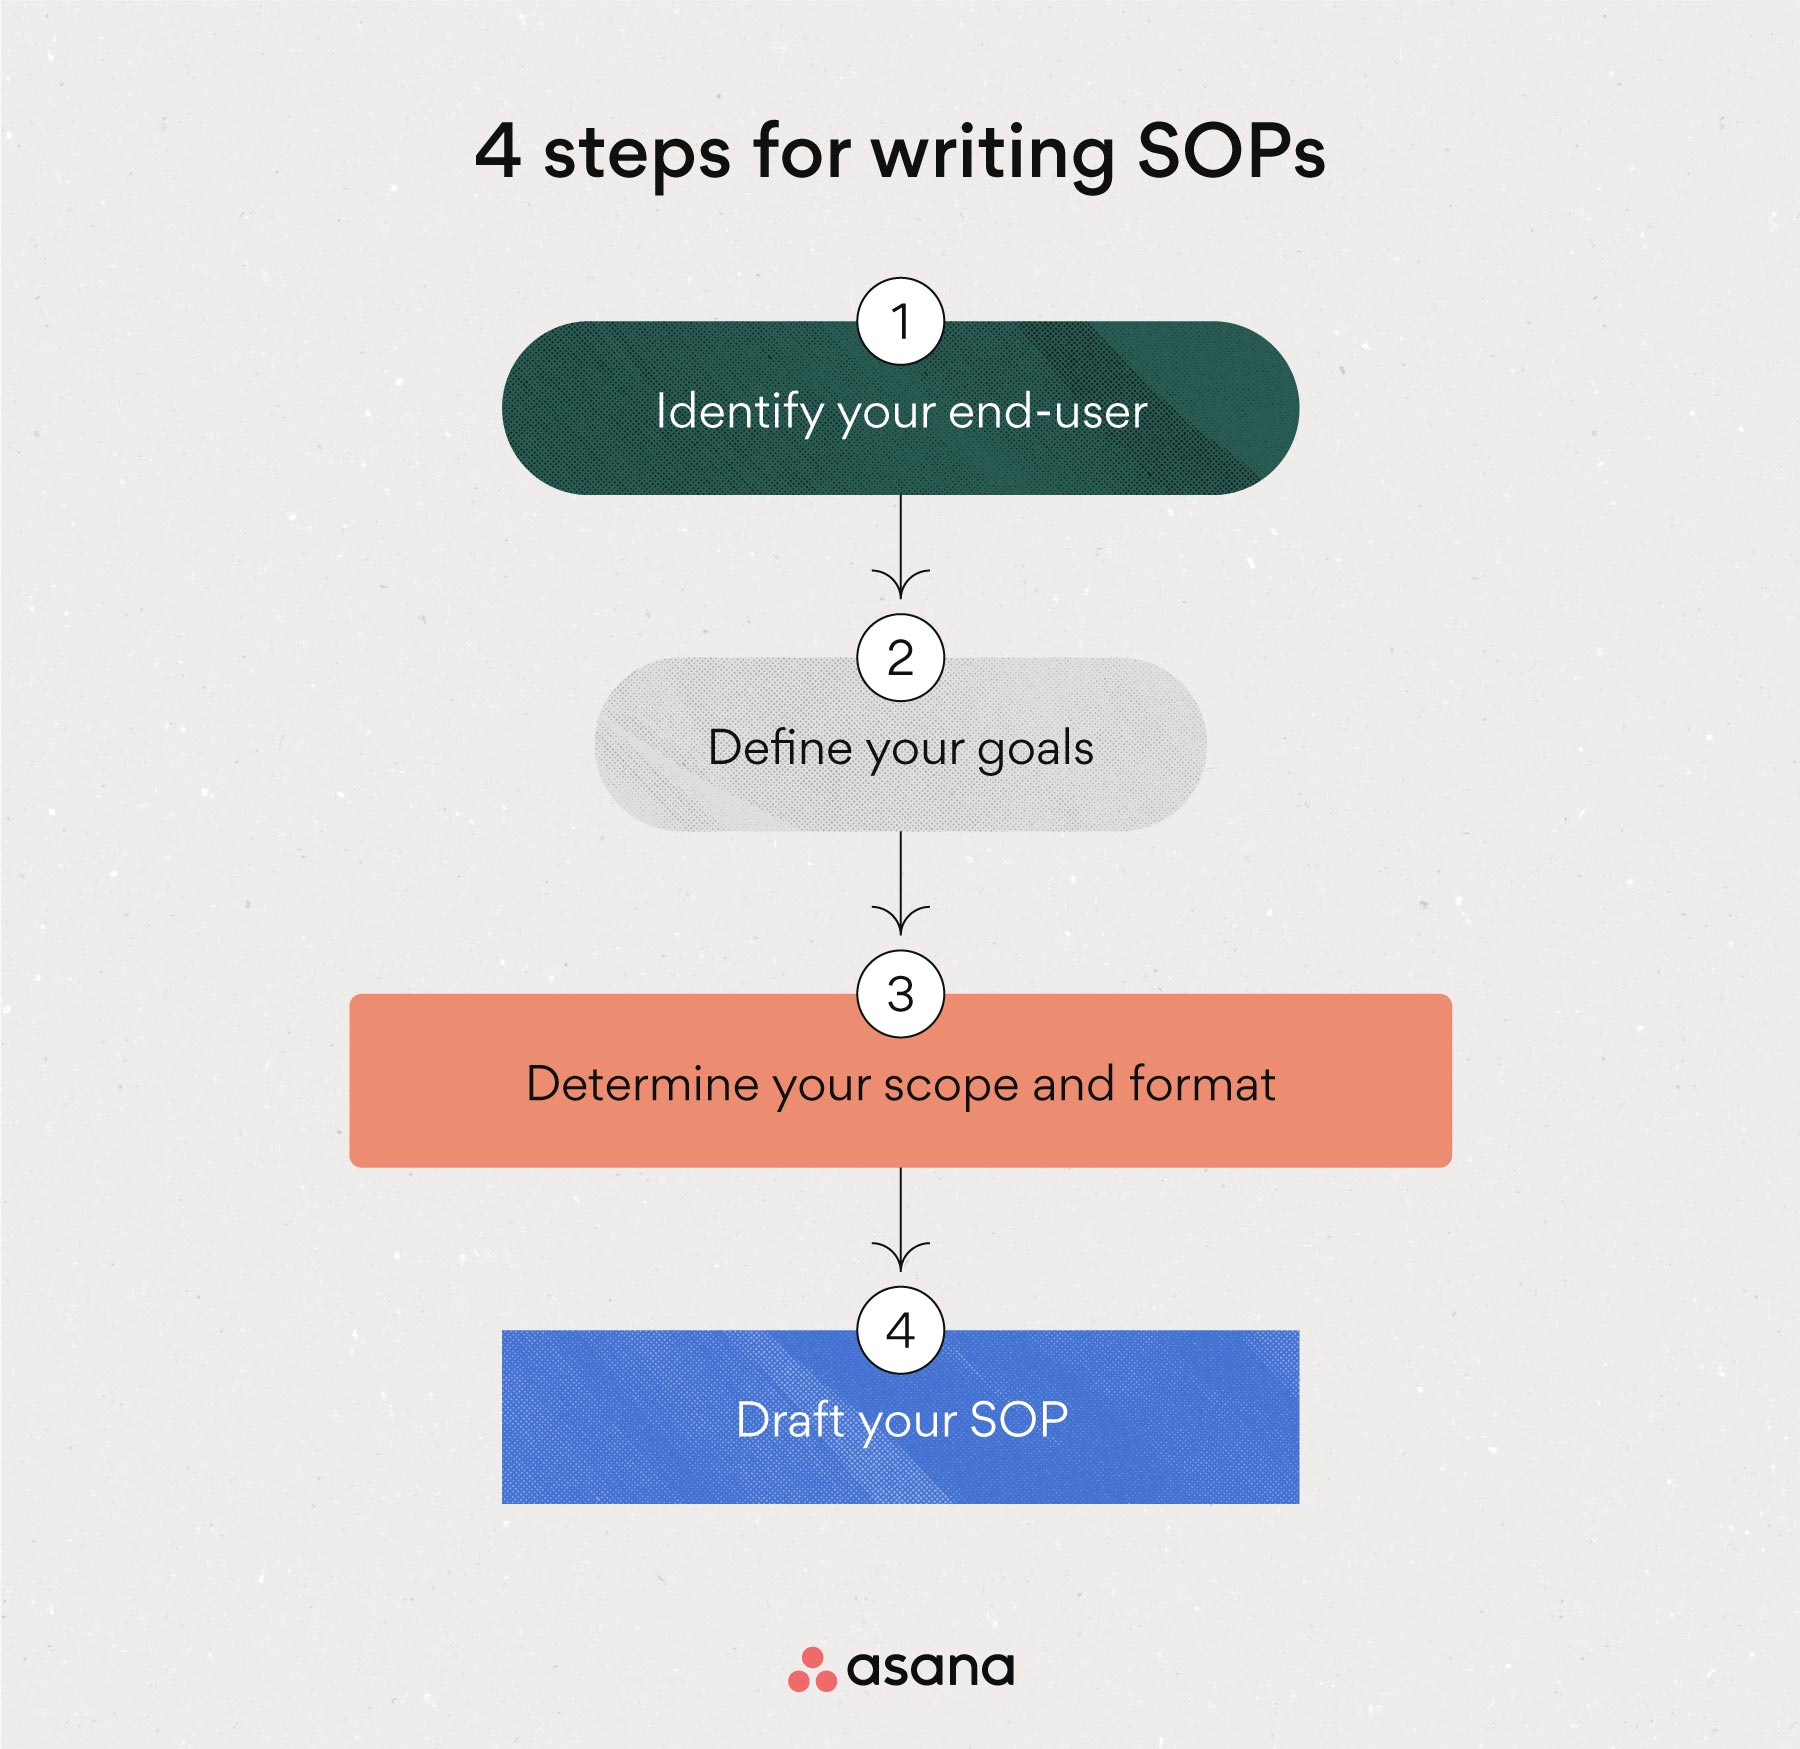 4 steps for writing SOPs